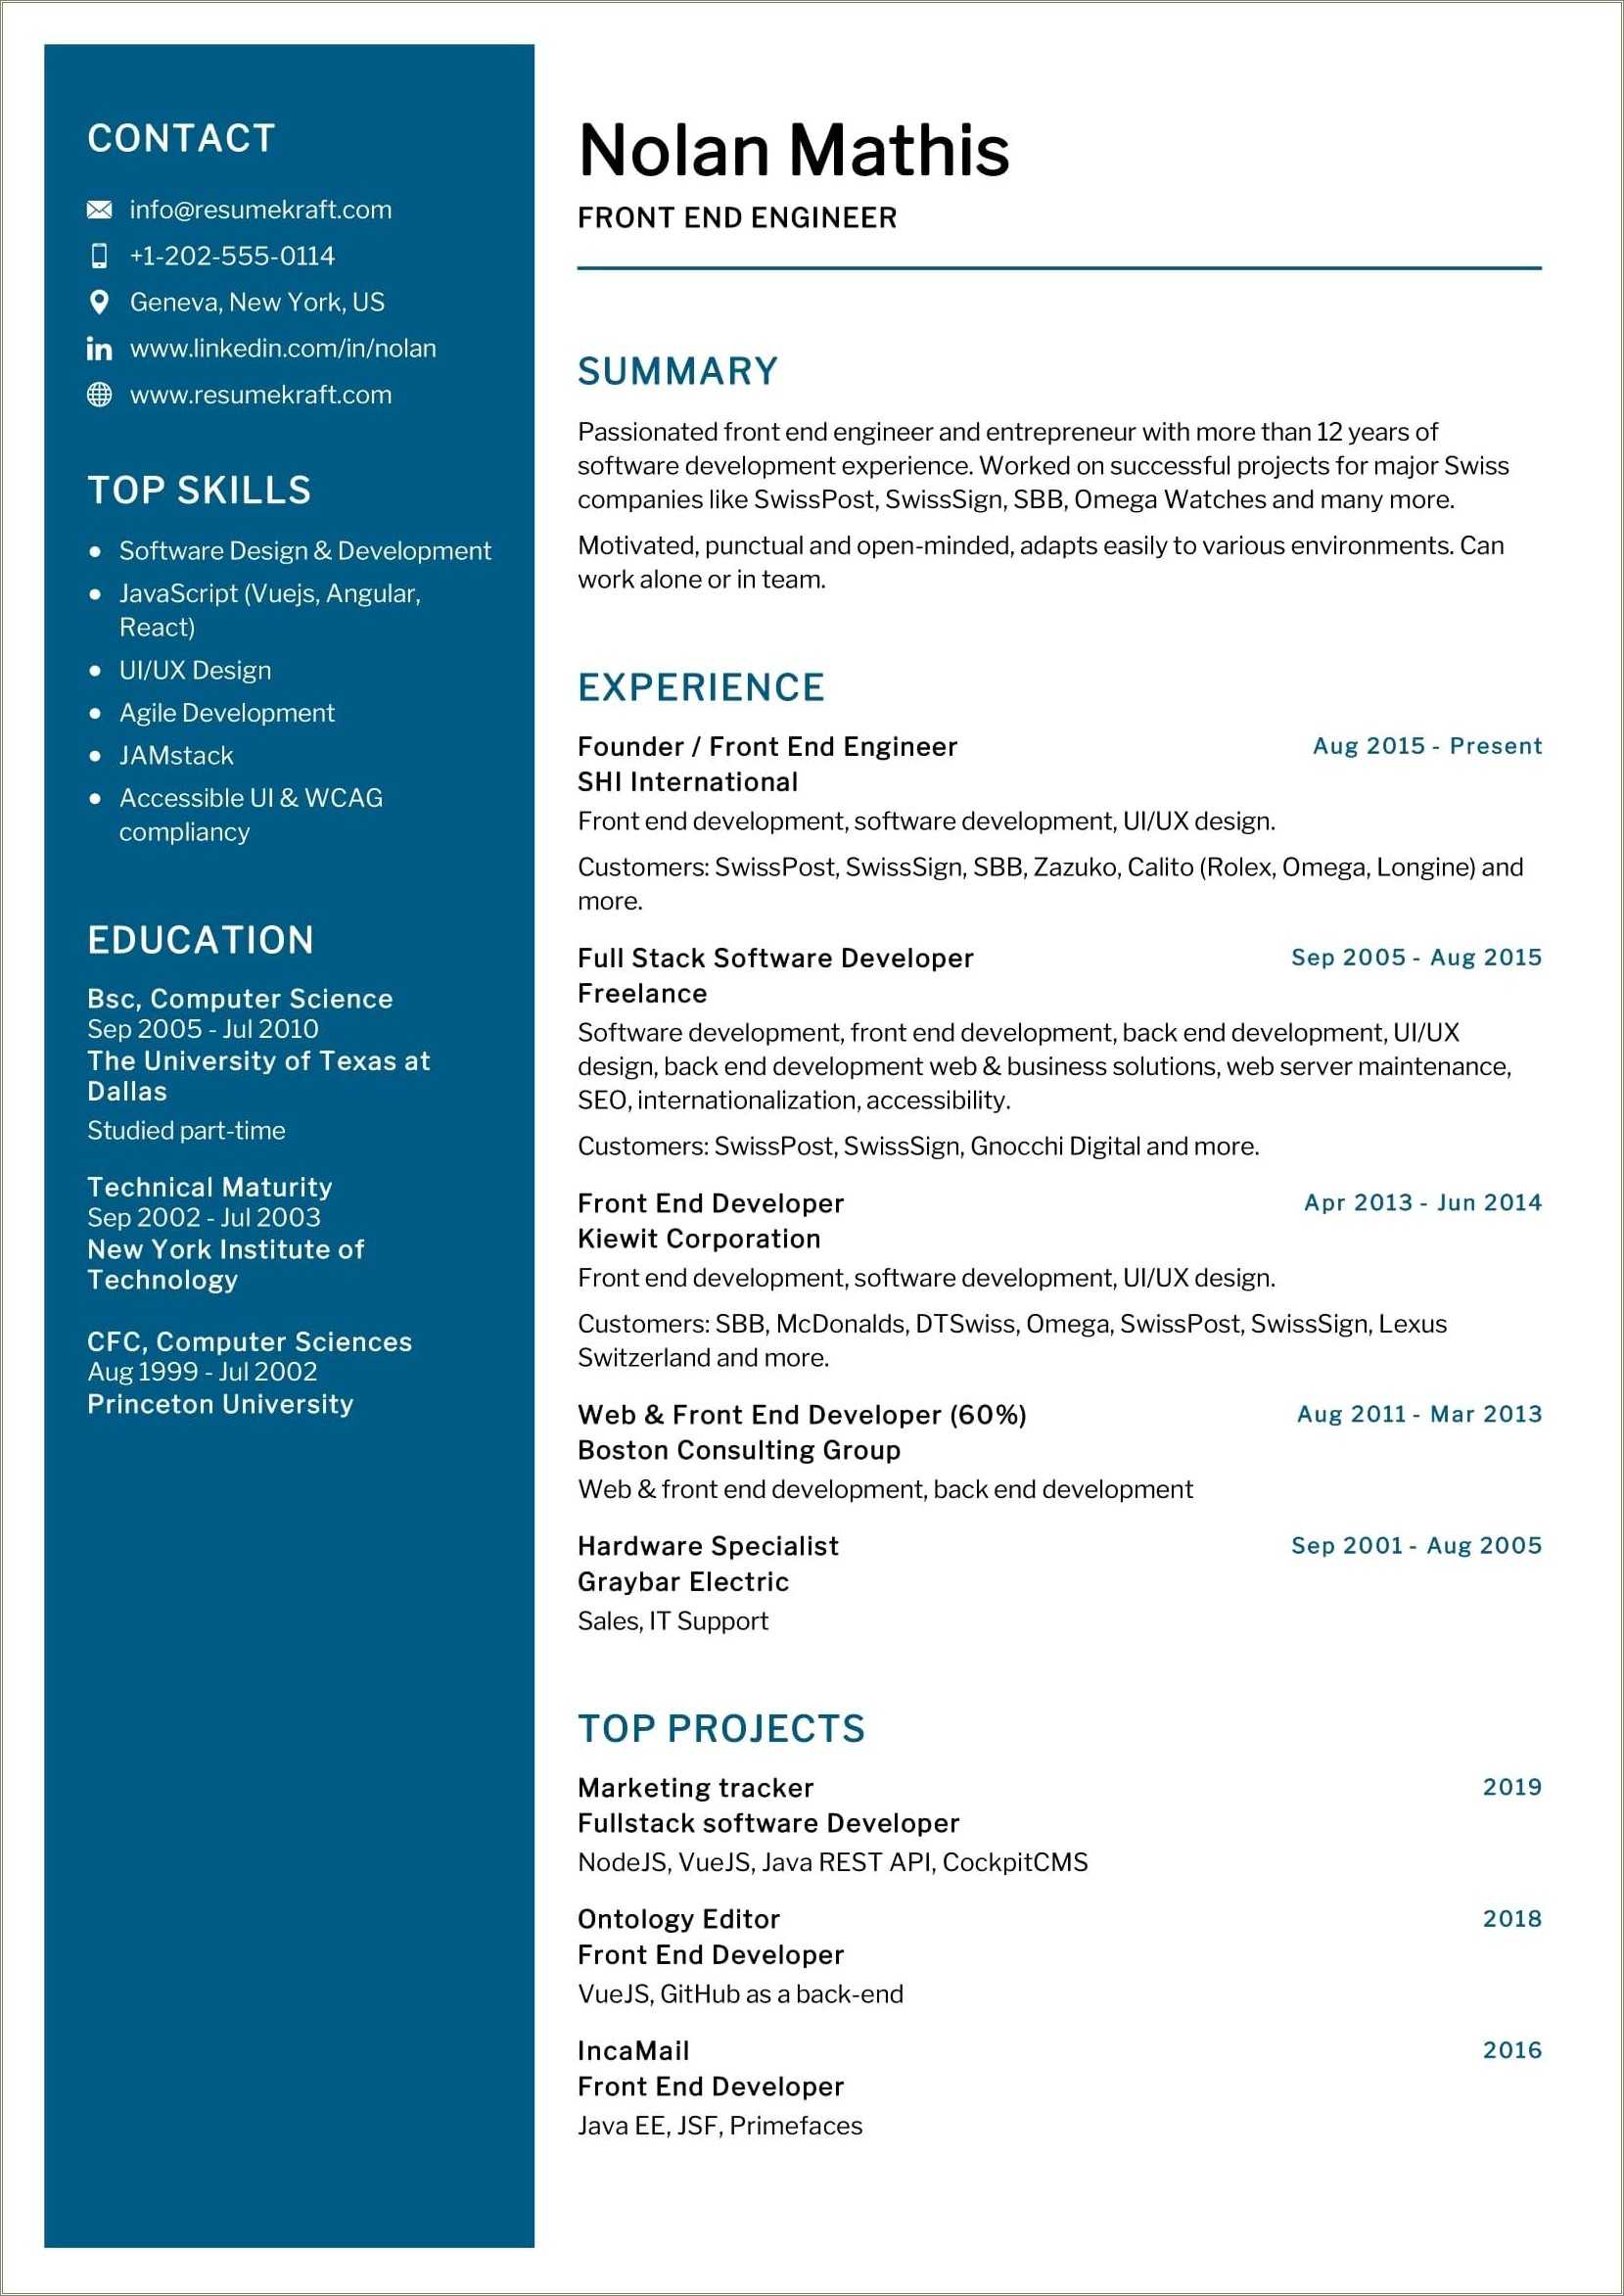 2 Years Experience Resume For Front End Developer